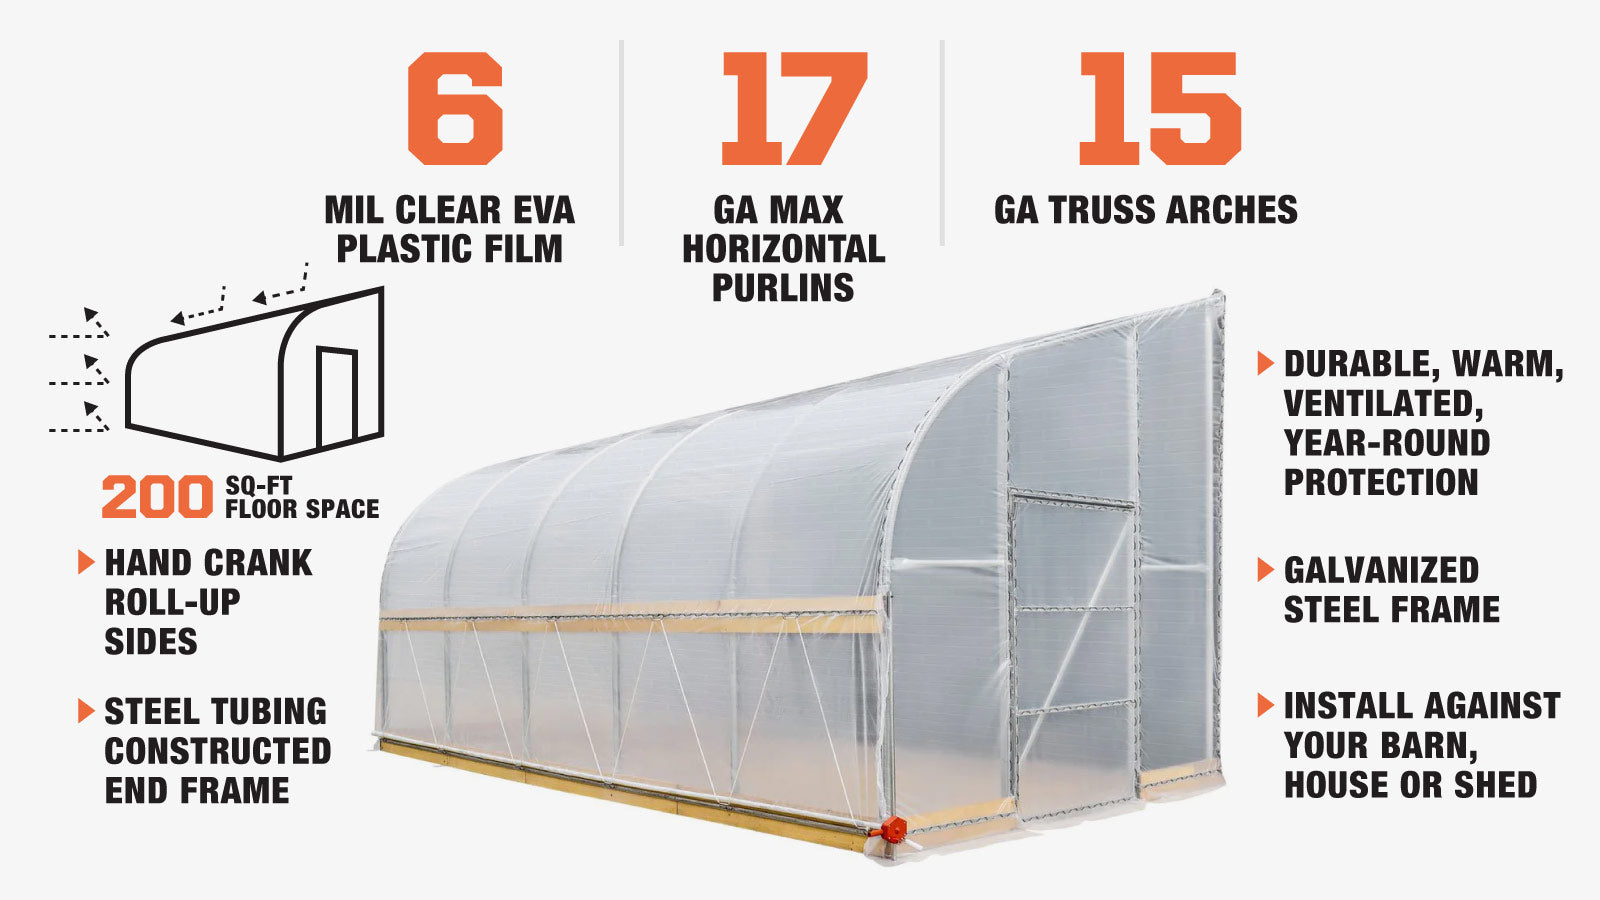 TMG Industrial 10' x 20' Lean-To Greenhouse Grow Tent w/6 Mil Clear EVA Plastic Film, Cold Frame, Manivelle Roll-Up Side, 6-½' Sidewall, TMG-GHL1020-description-image